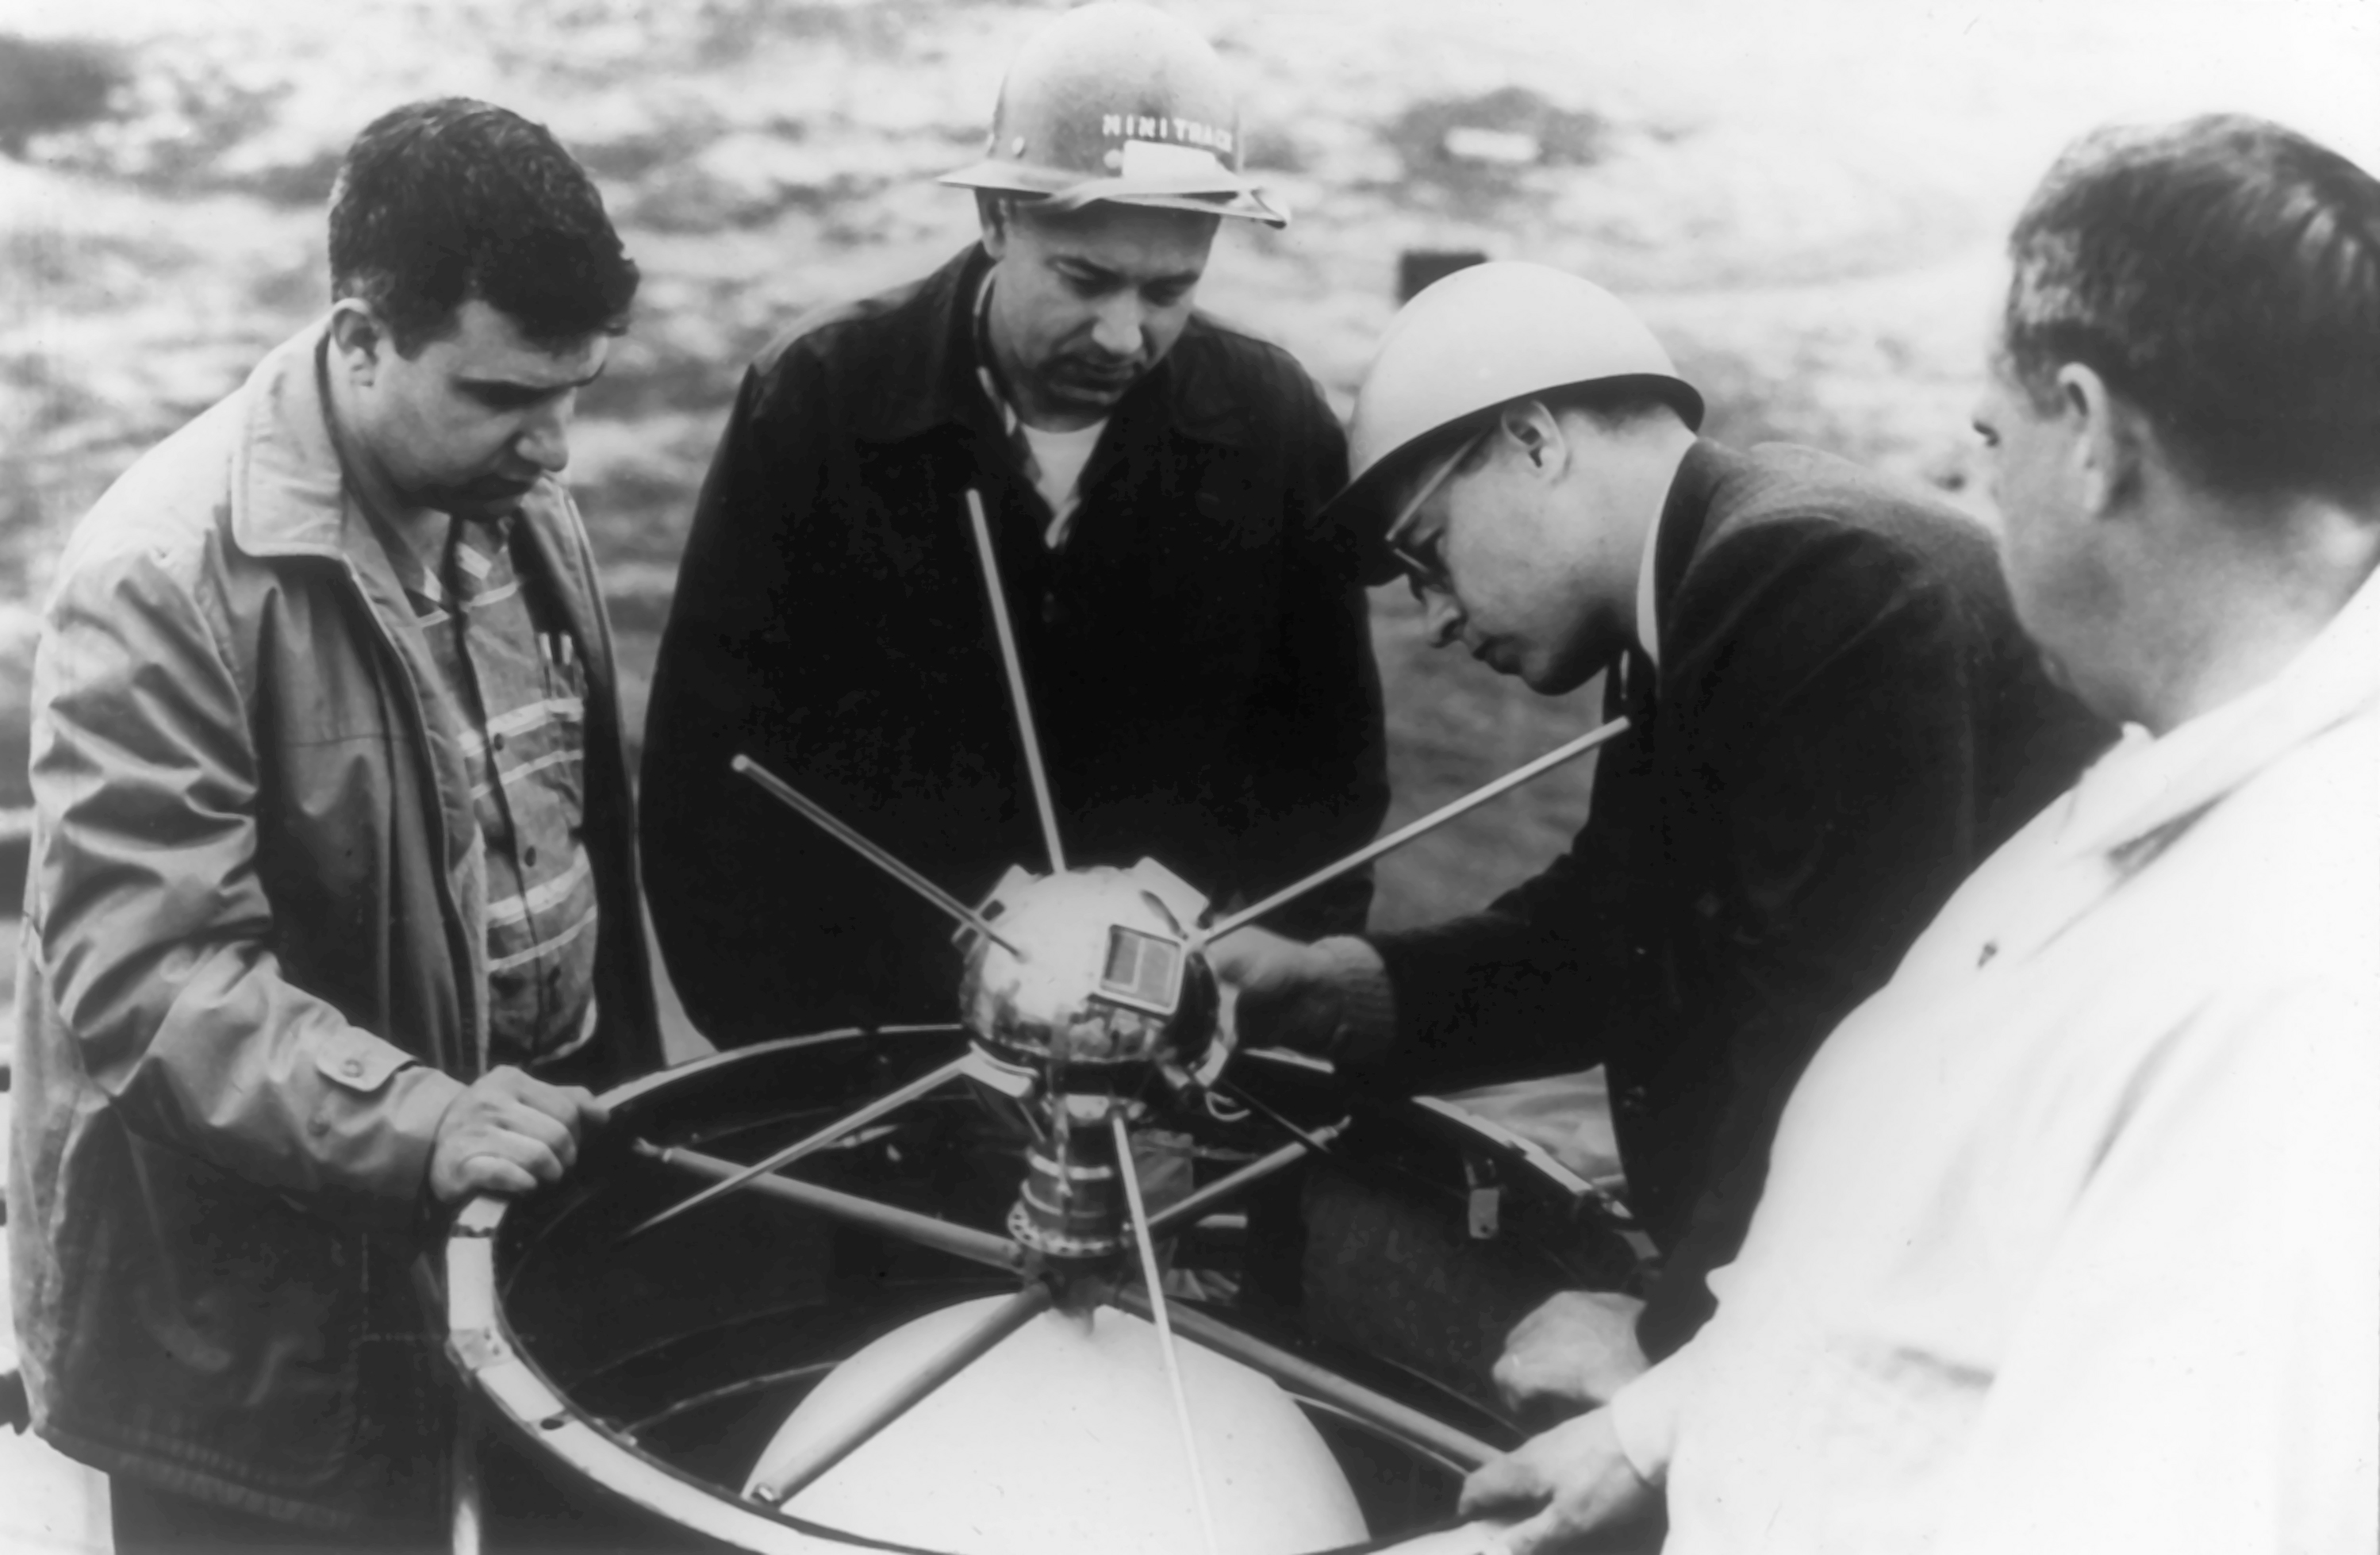 A team of Vanguard I scientists mount the satellite in the rocket.  (Photo/Image provided courtesy of the Naval Research Laboratory.)